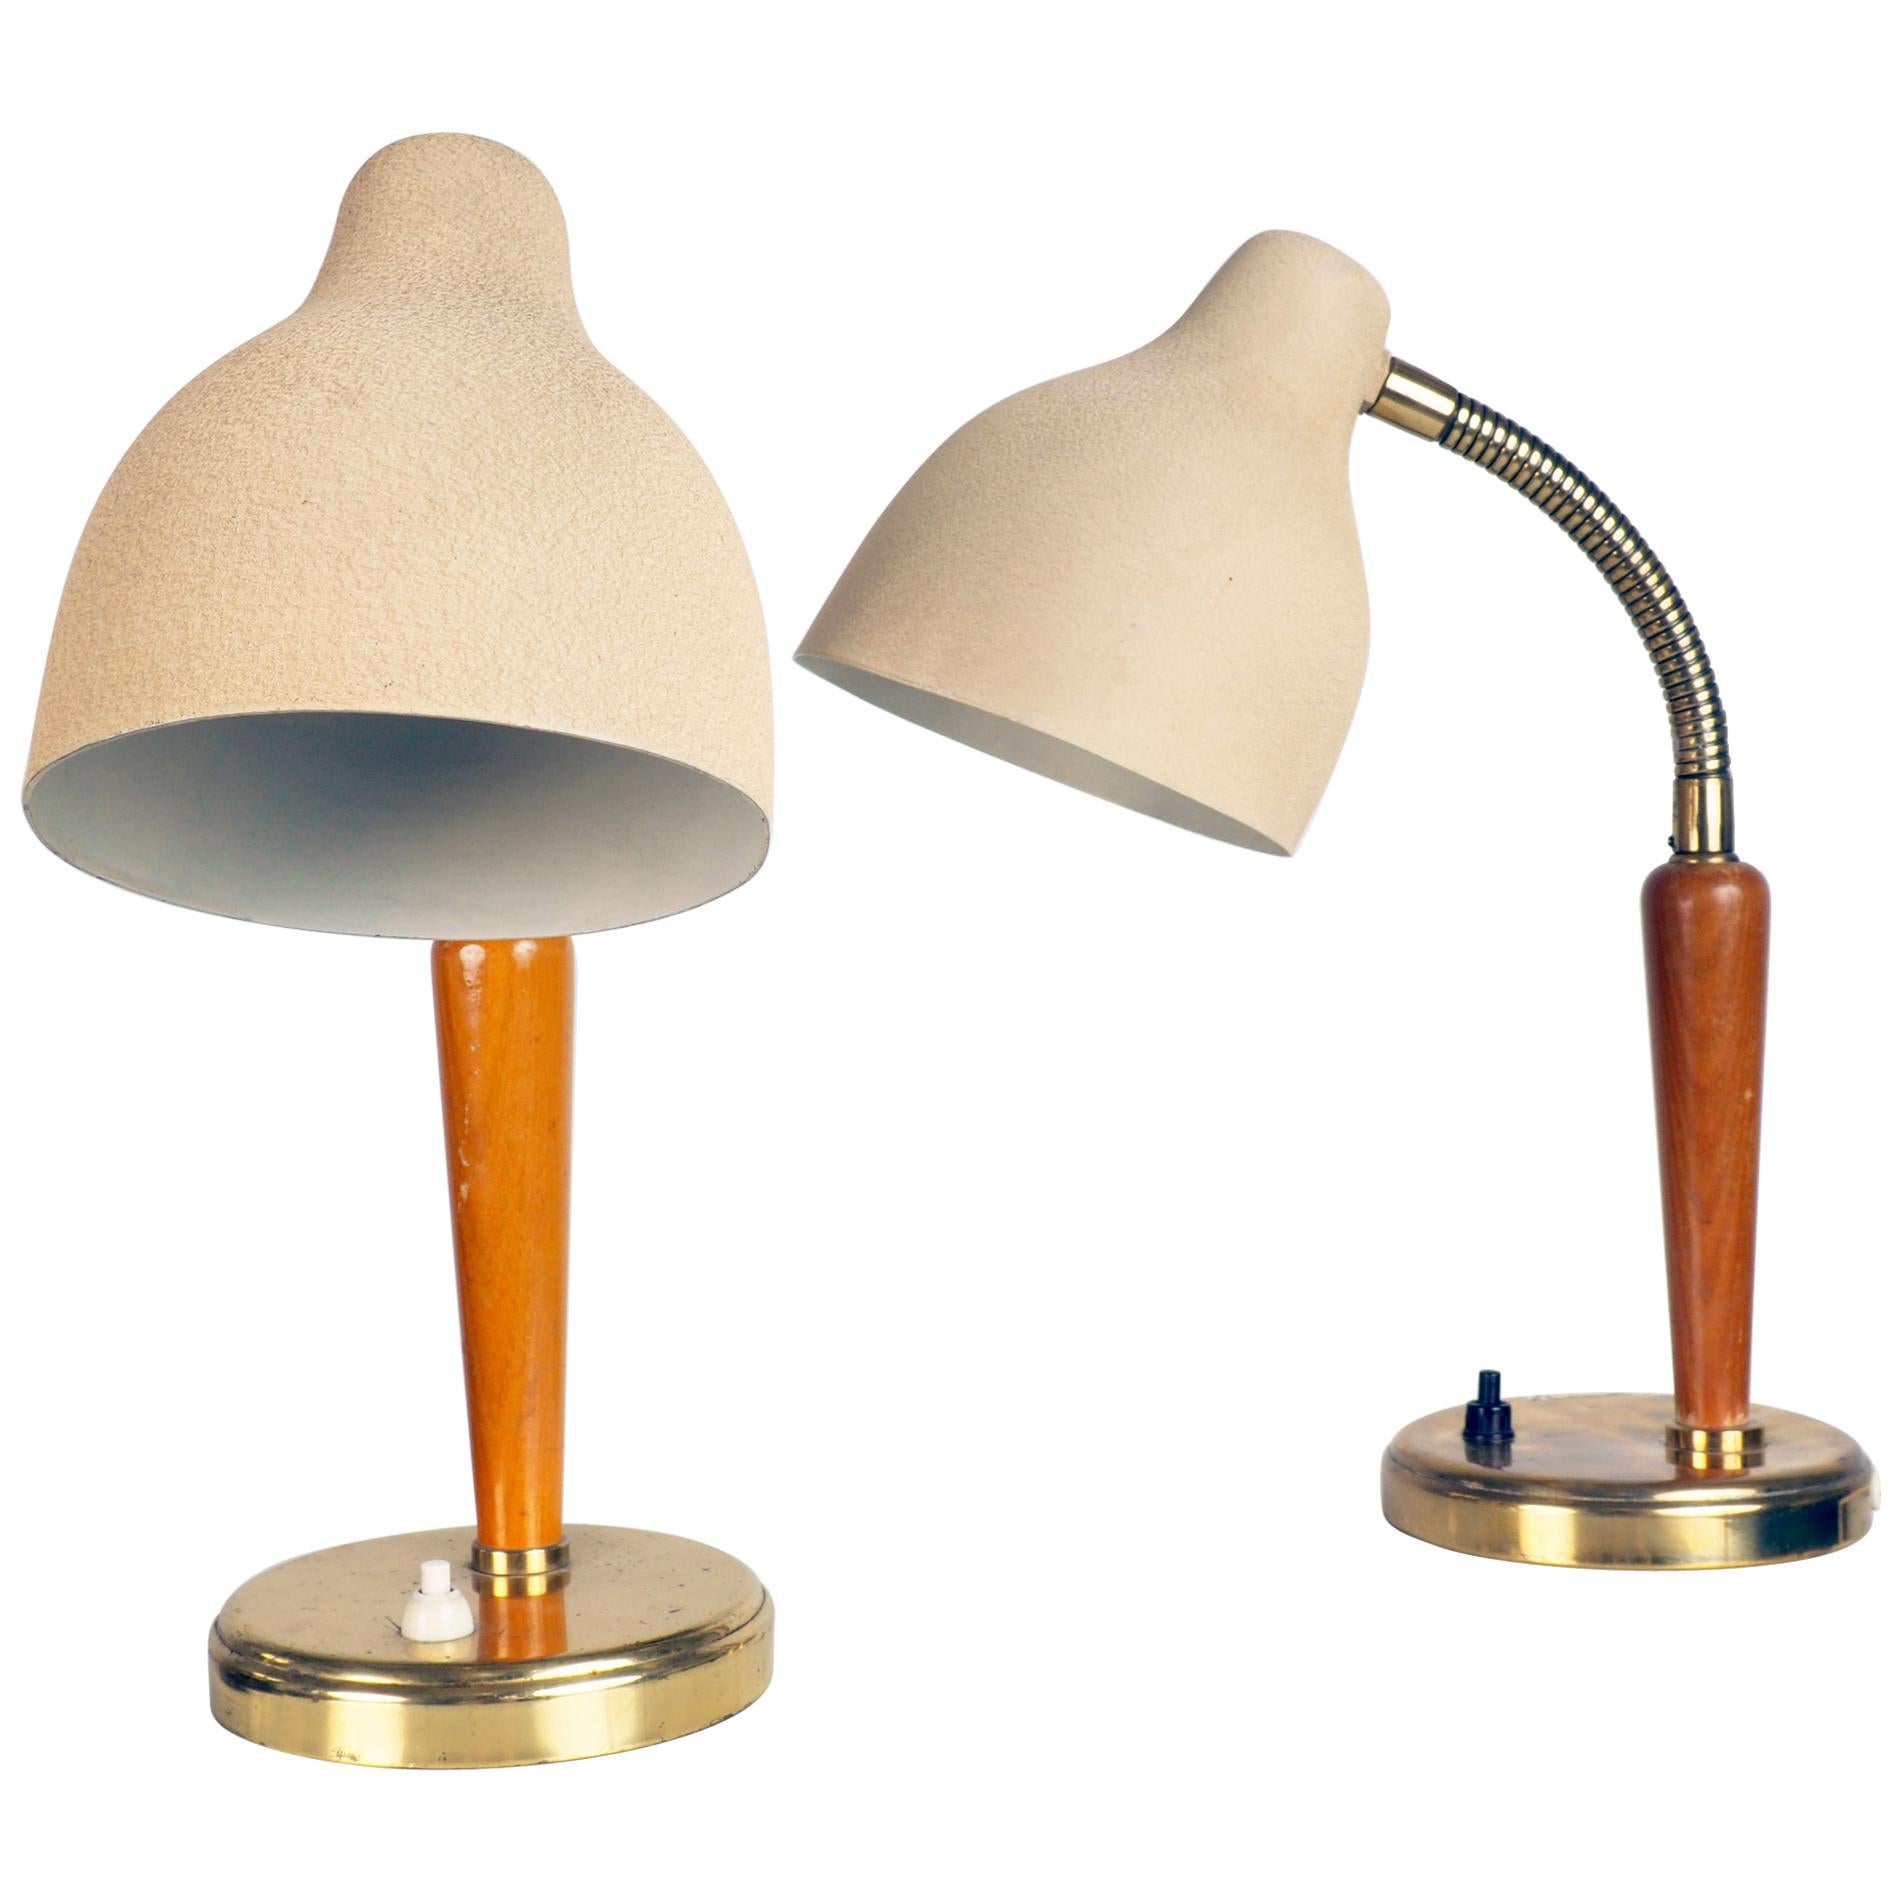 Pair of Table Lamps Made by EOS, Sweden, 1950s